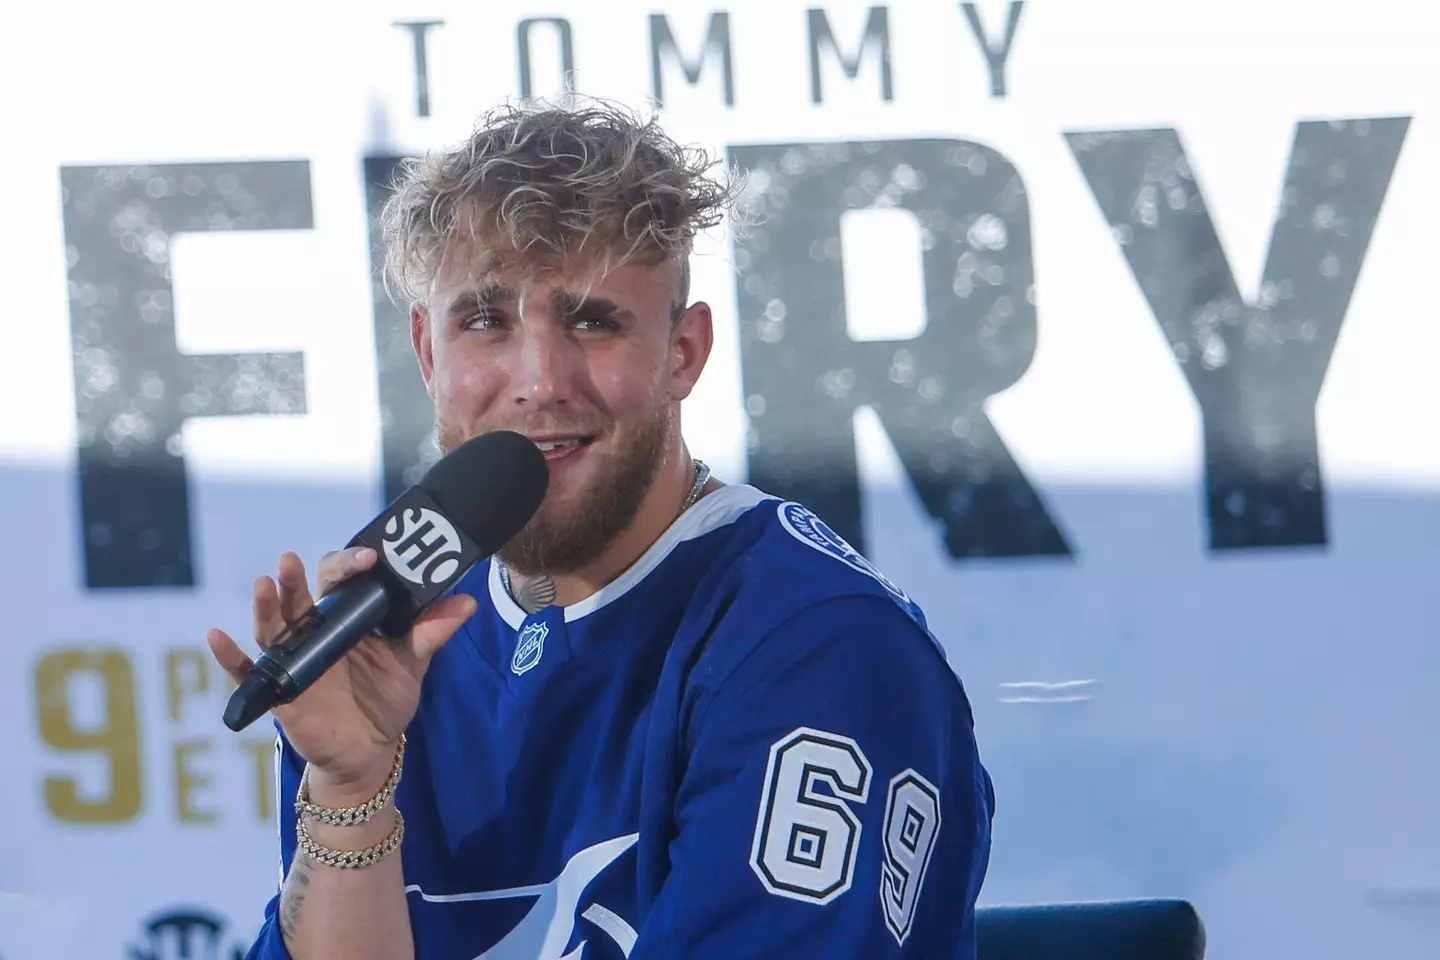 Tommy Fury has responded to Jake Paul's call out on Twitter.